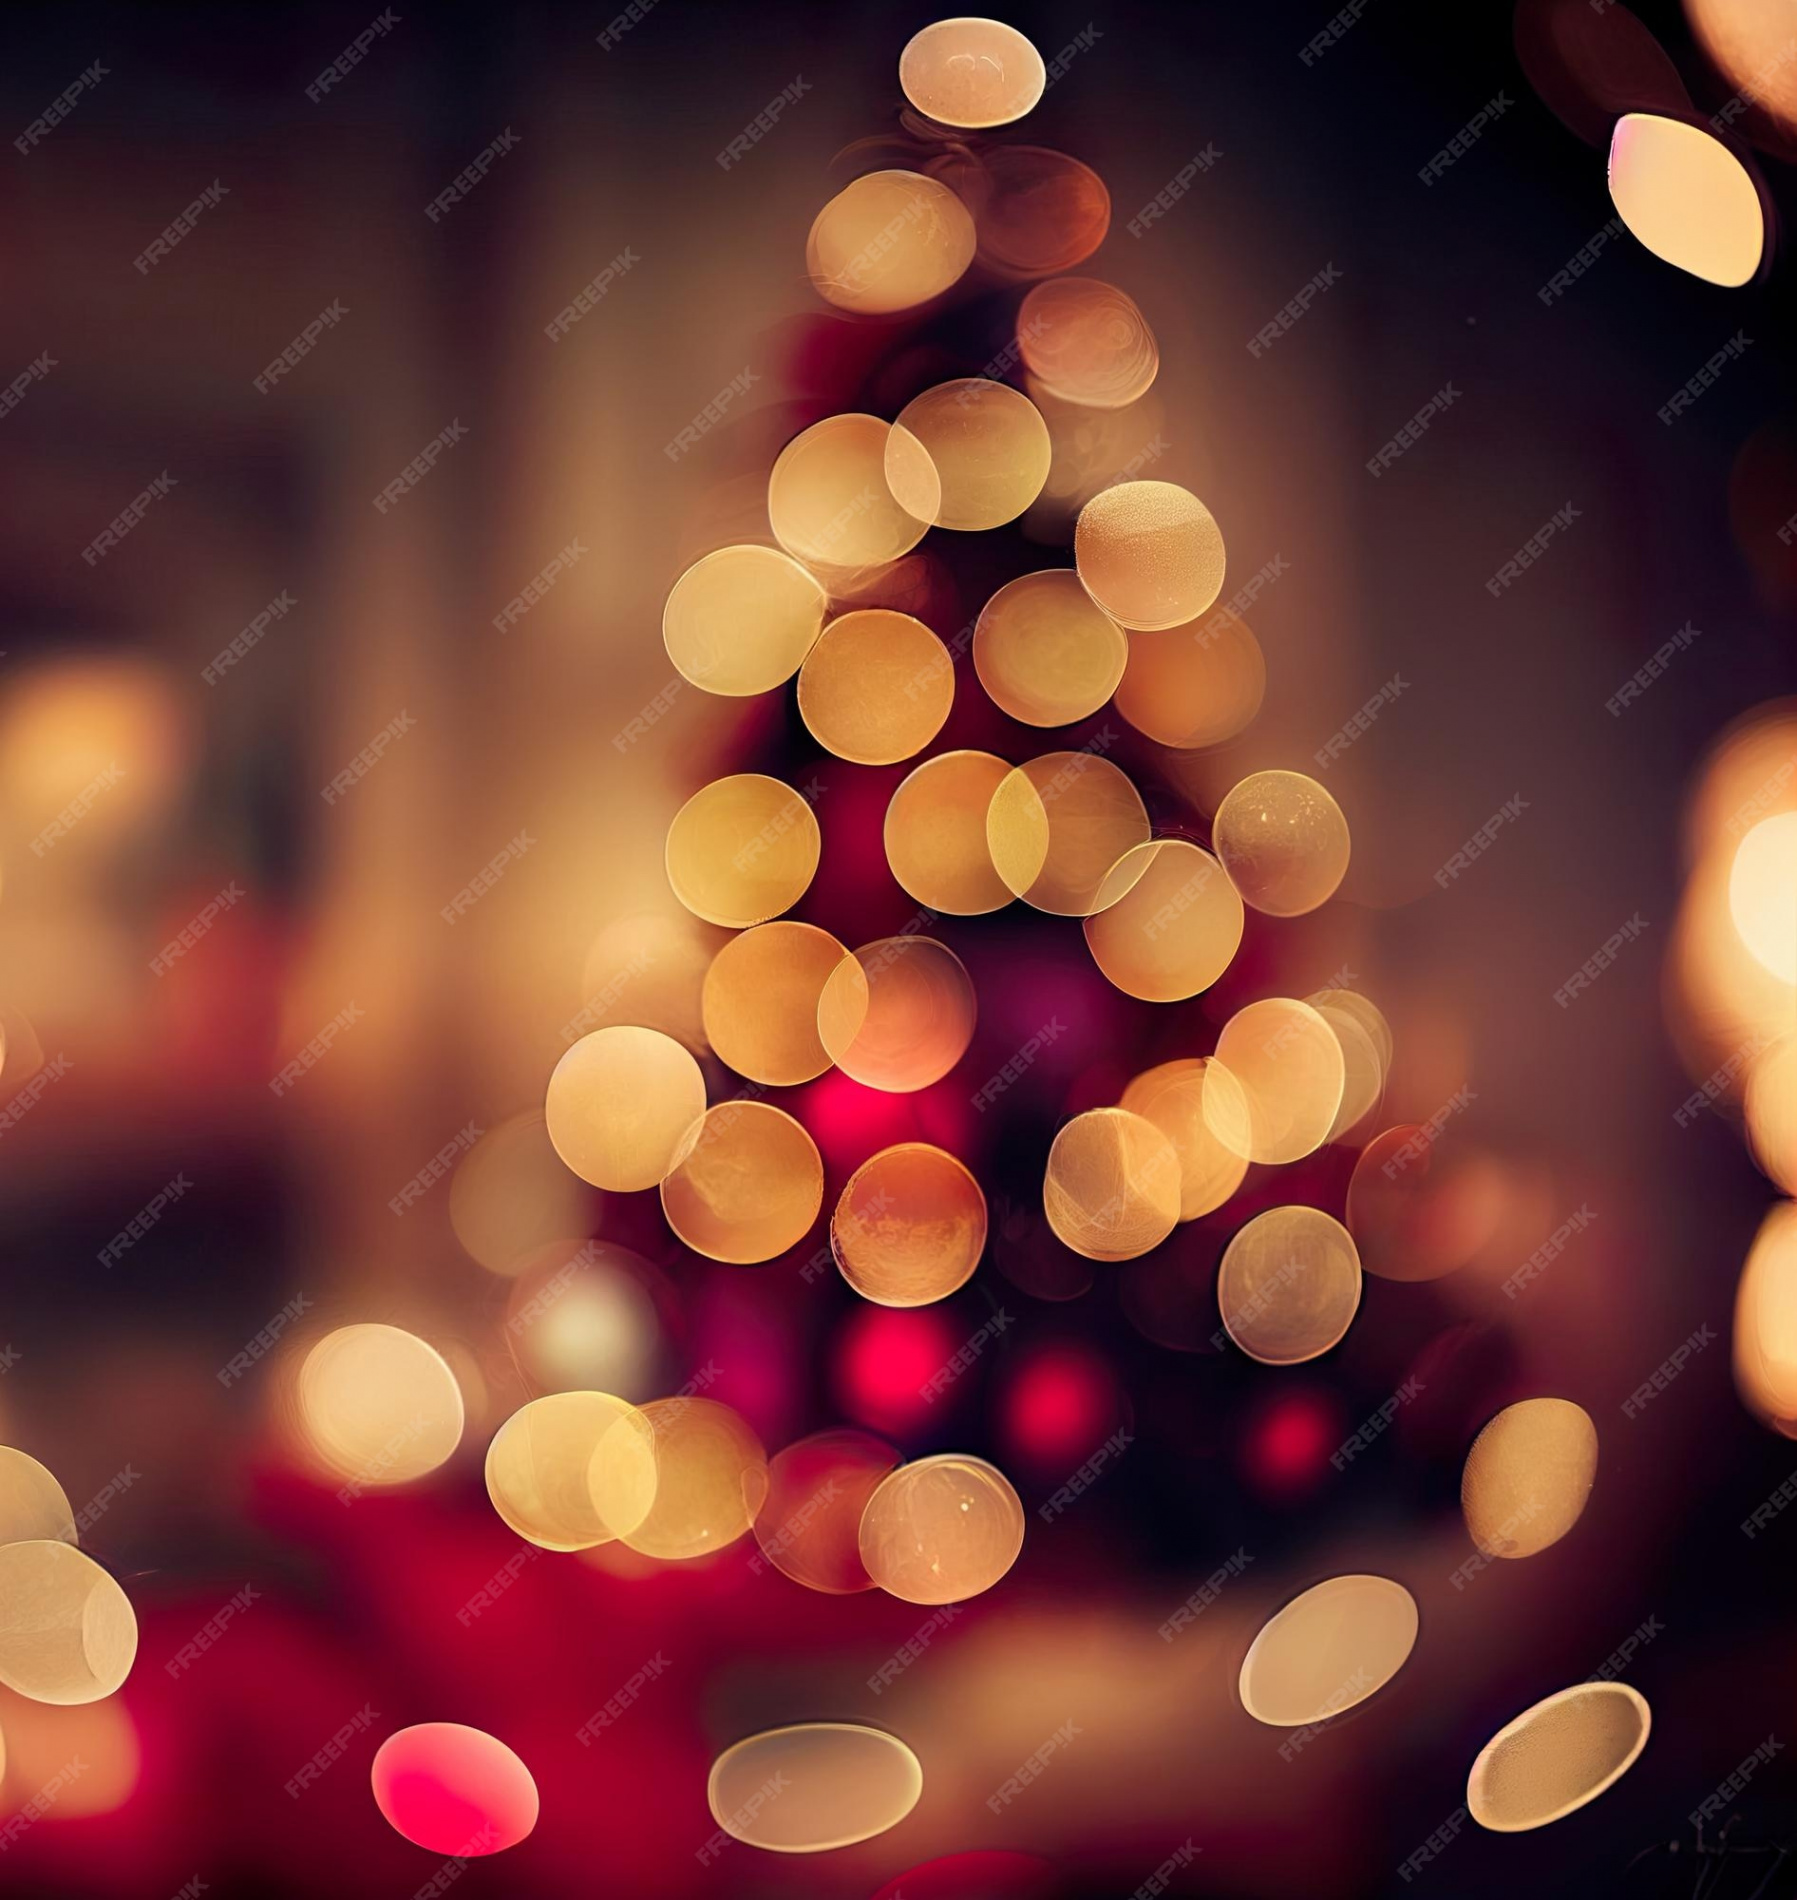 Premium Photo  Blurred christmas background with christmas tree